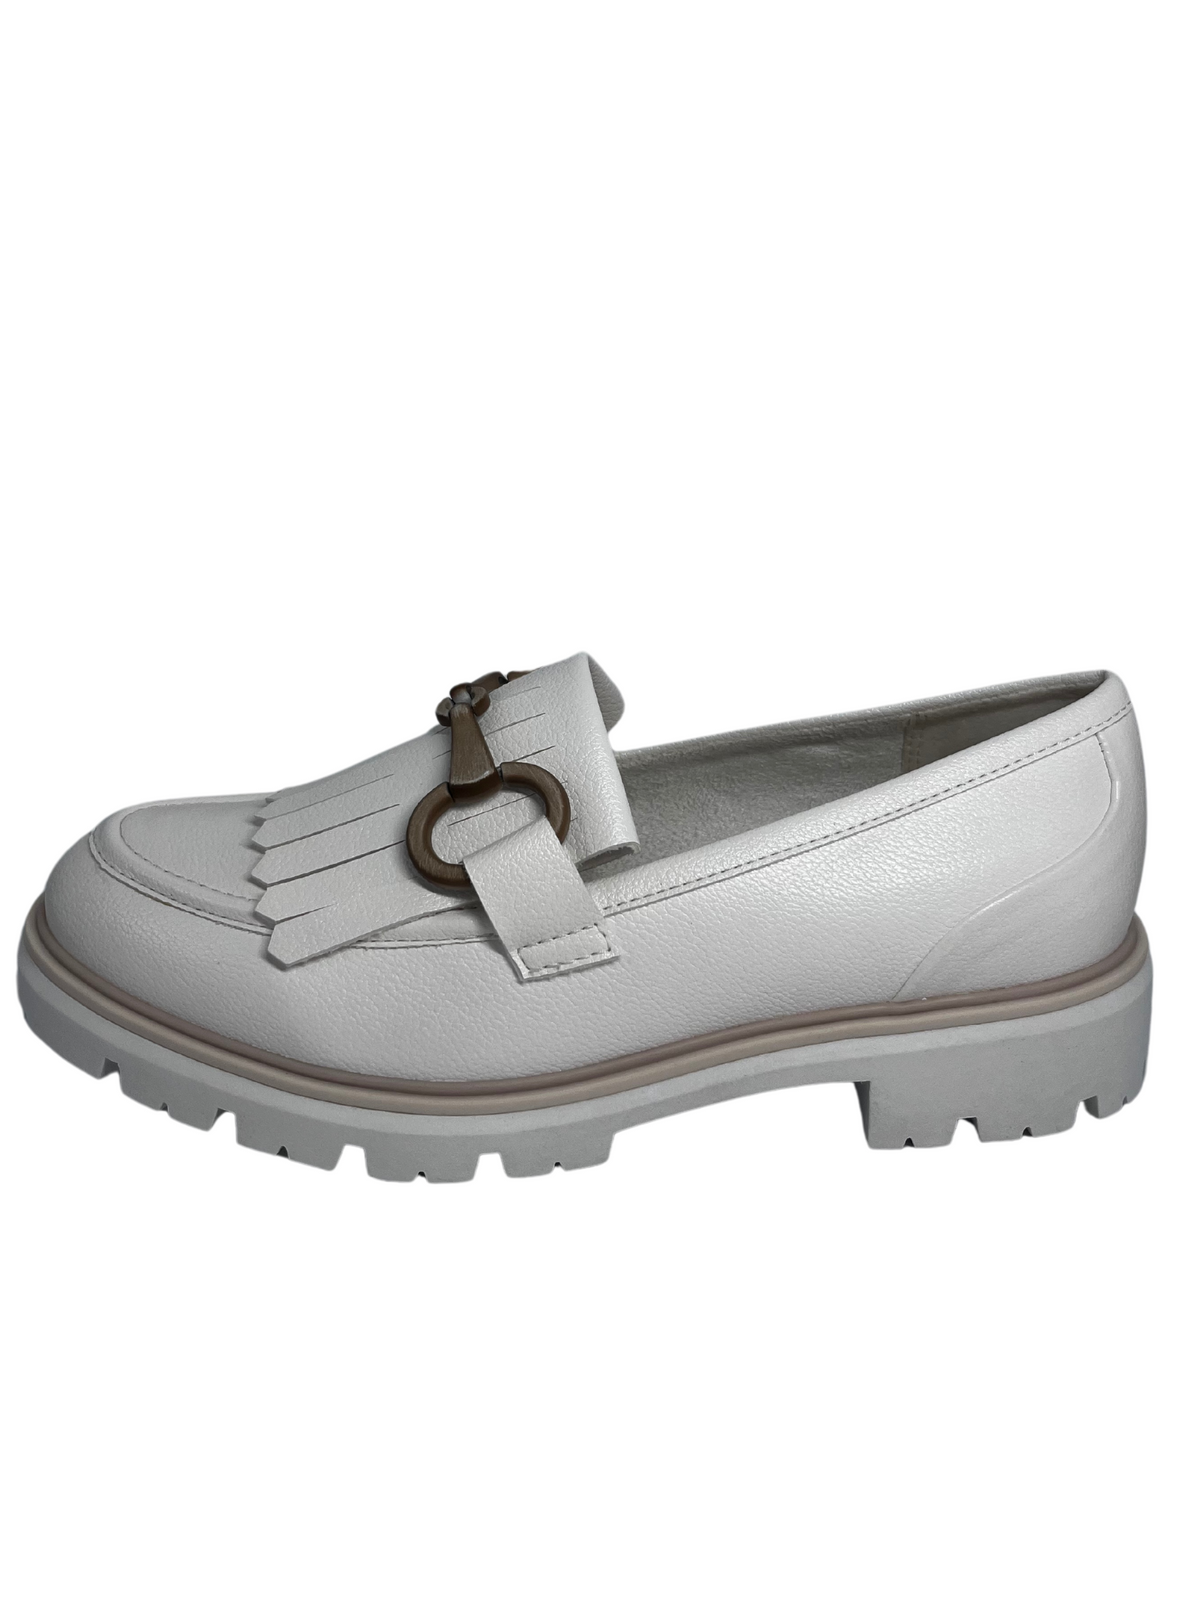 Marco Tozzi Cream Loafer With Tassle Design